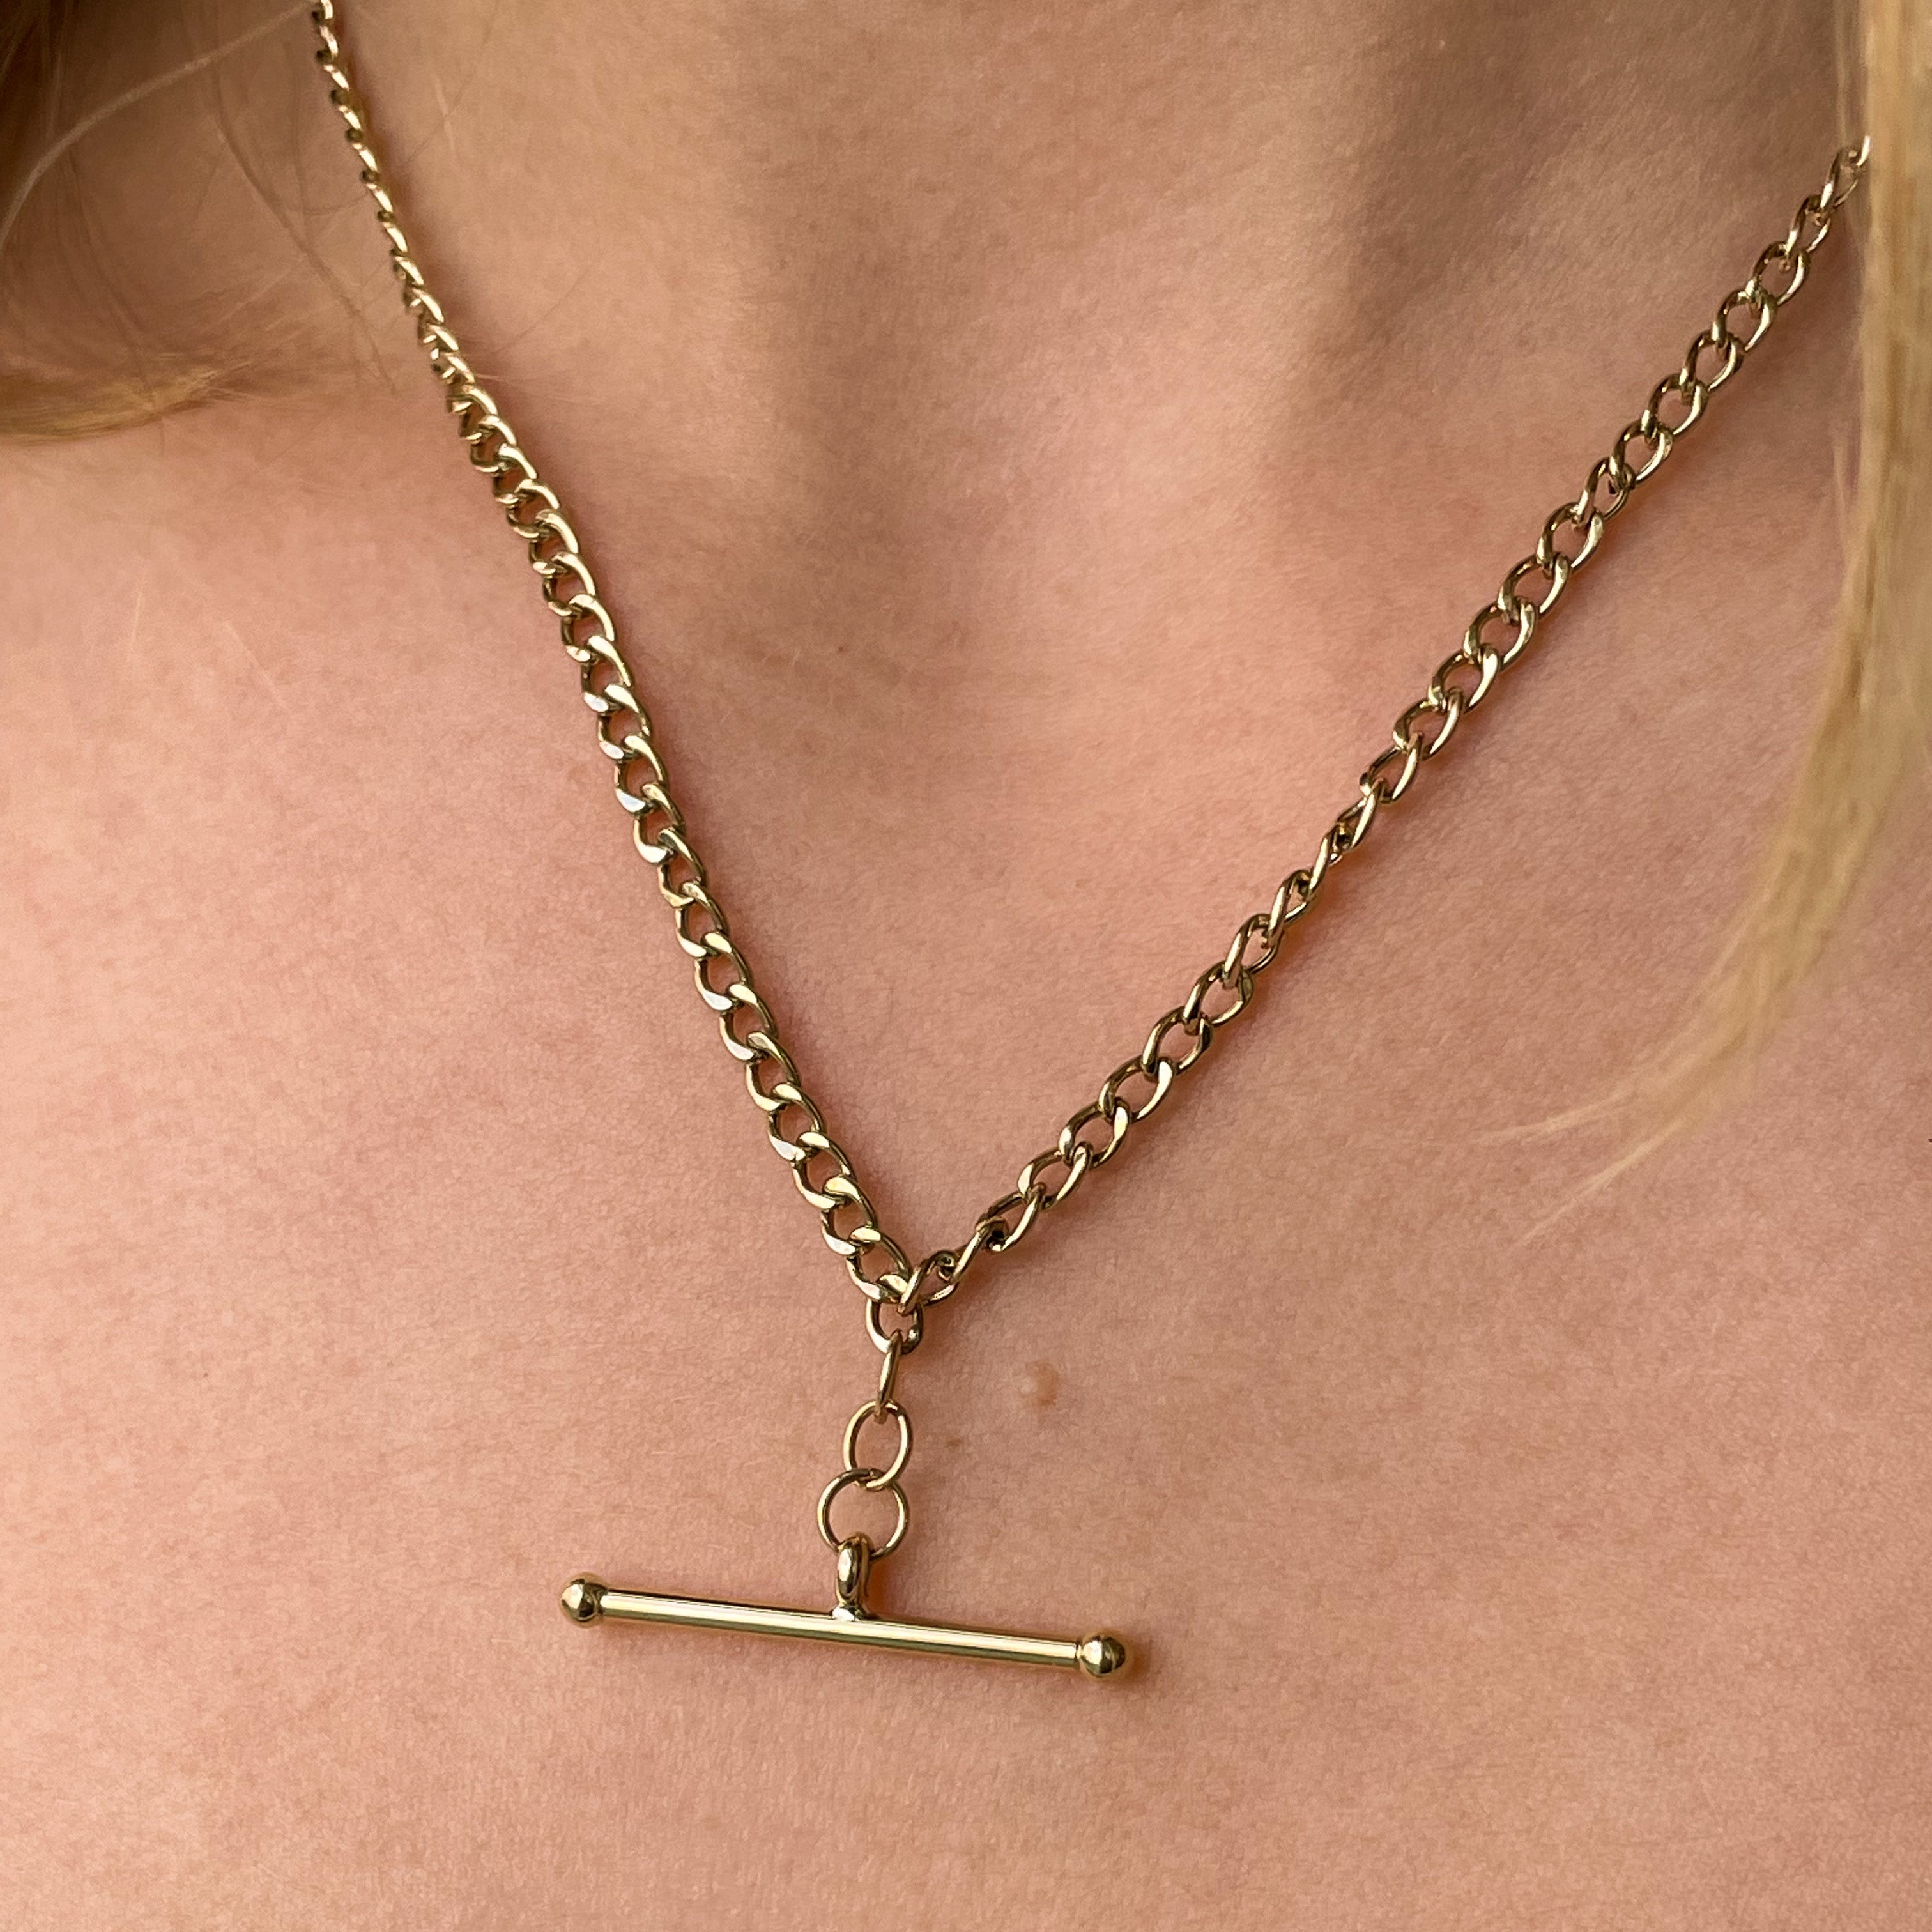 Gold T- bar necklace 18k gold plated over sterling silver